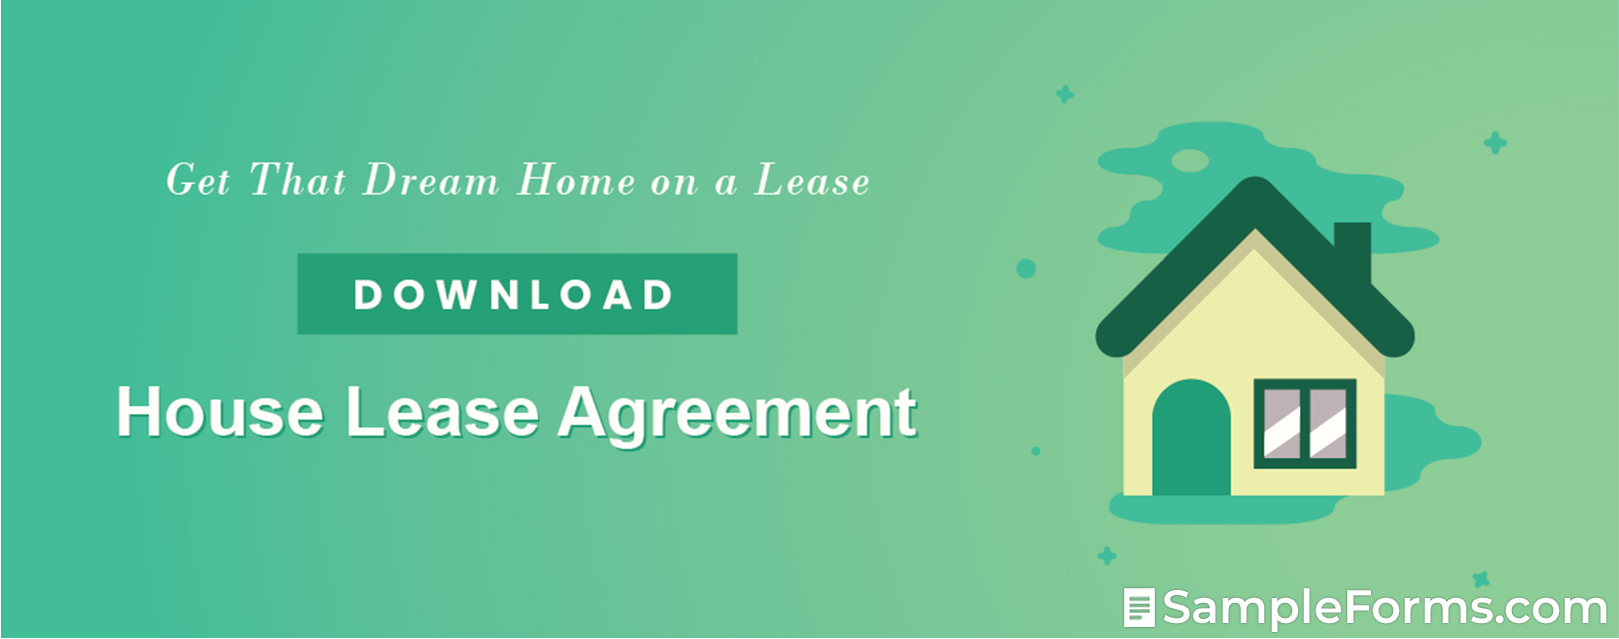 House Lease Agreement